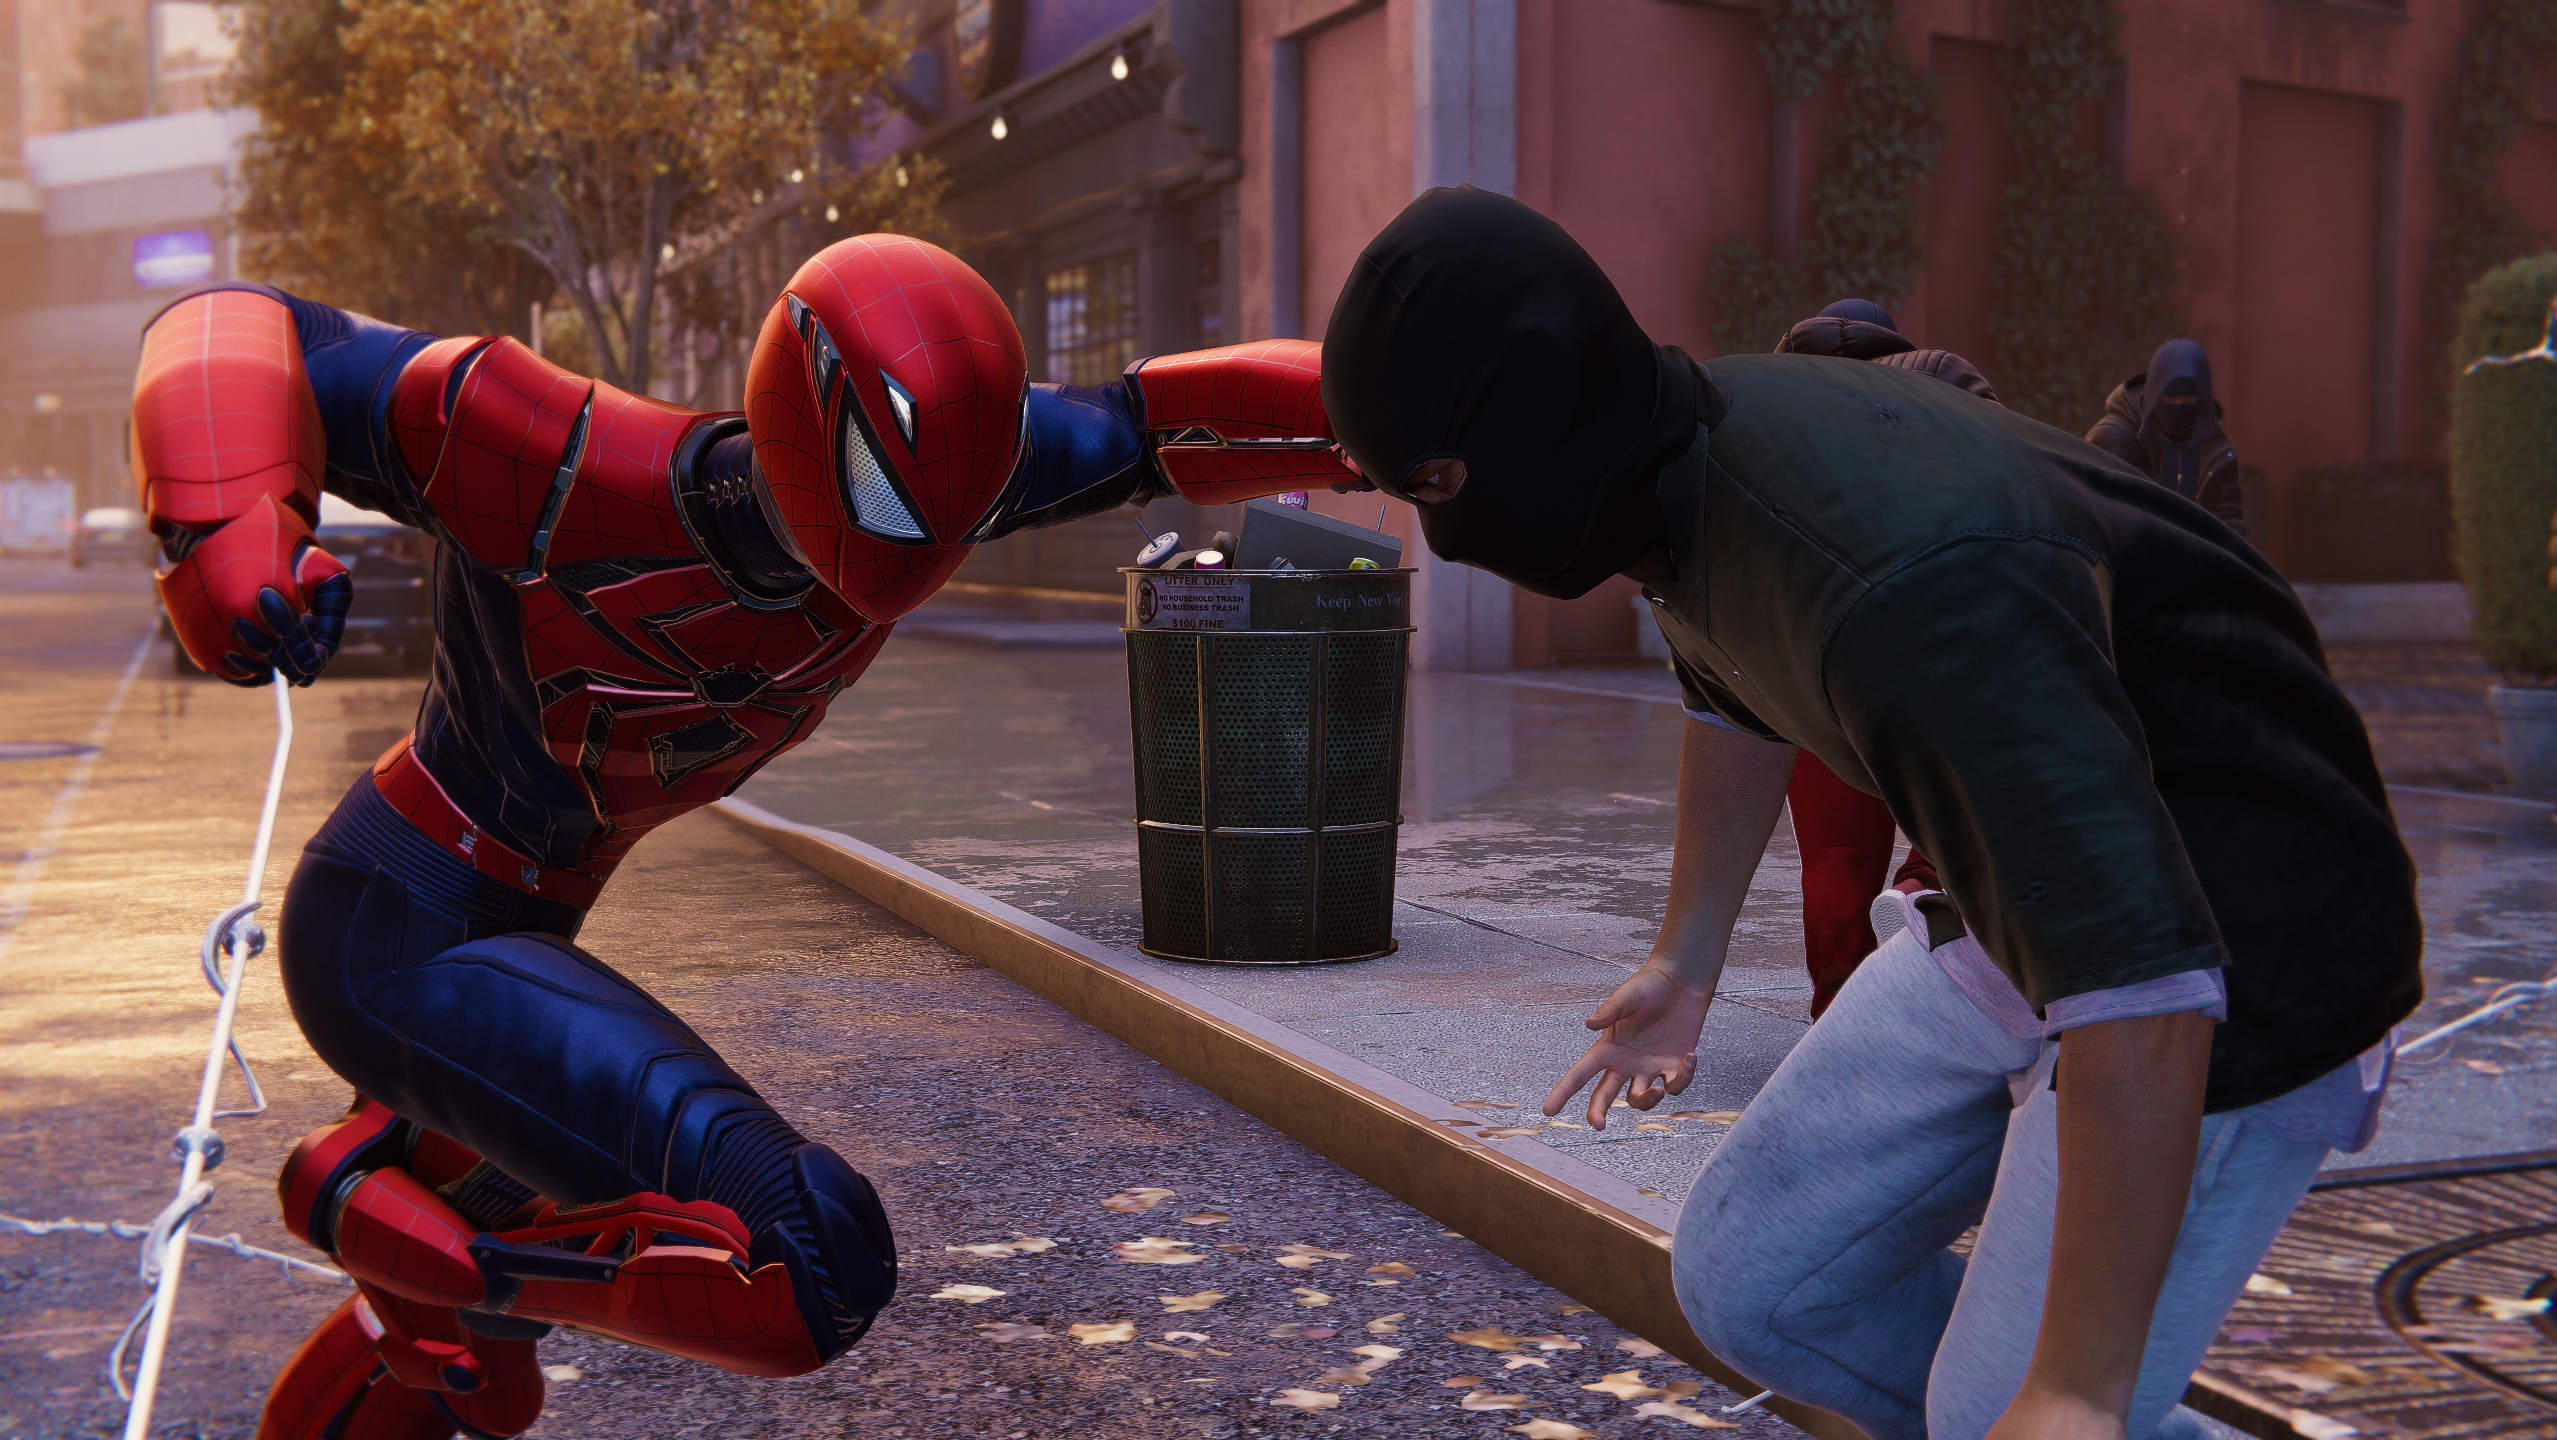 Marvel's Spider-Man Remastered modder gets banned over mod that replaces  LGBT flags - Niche Gamer